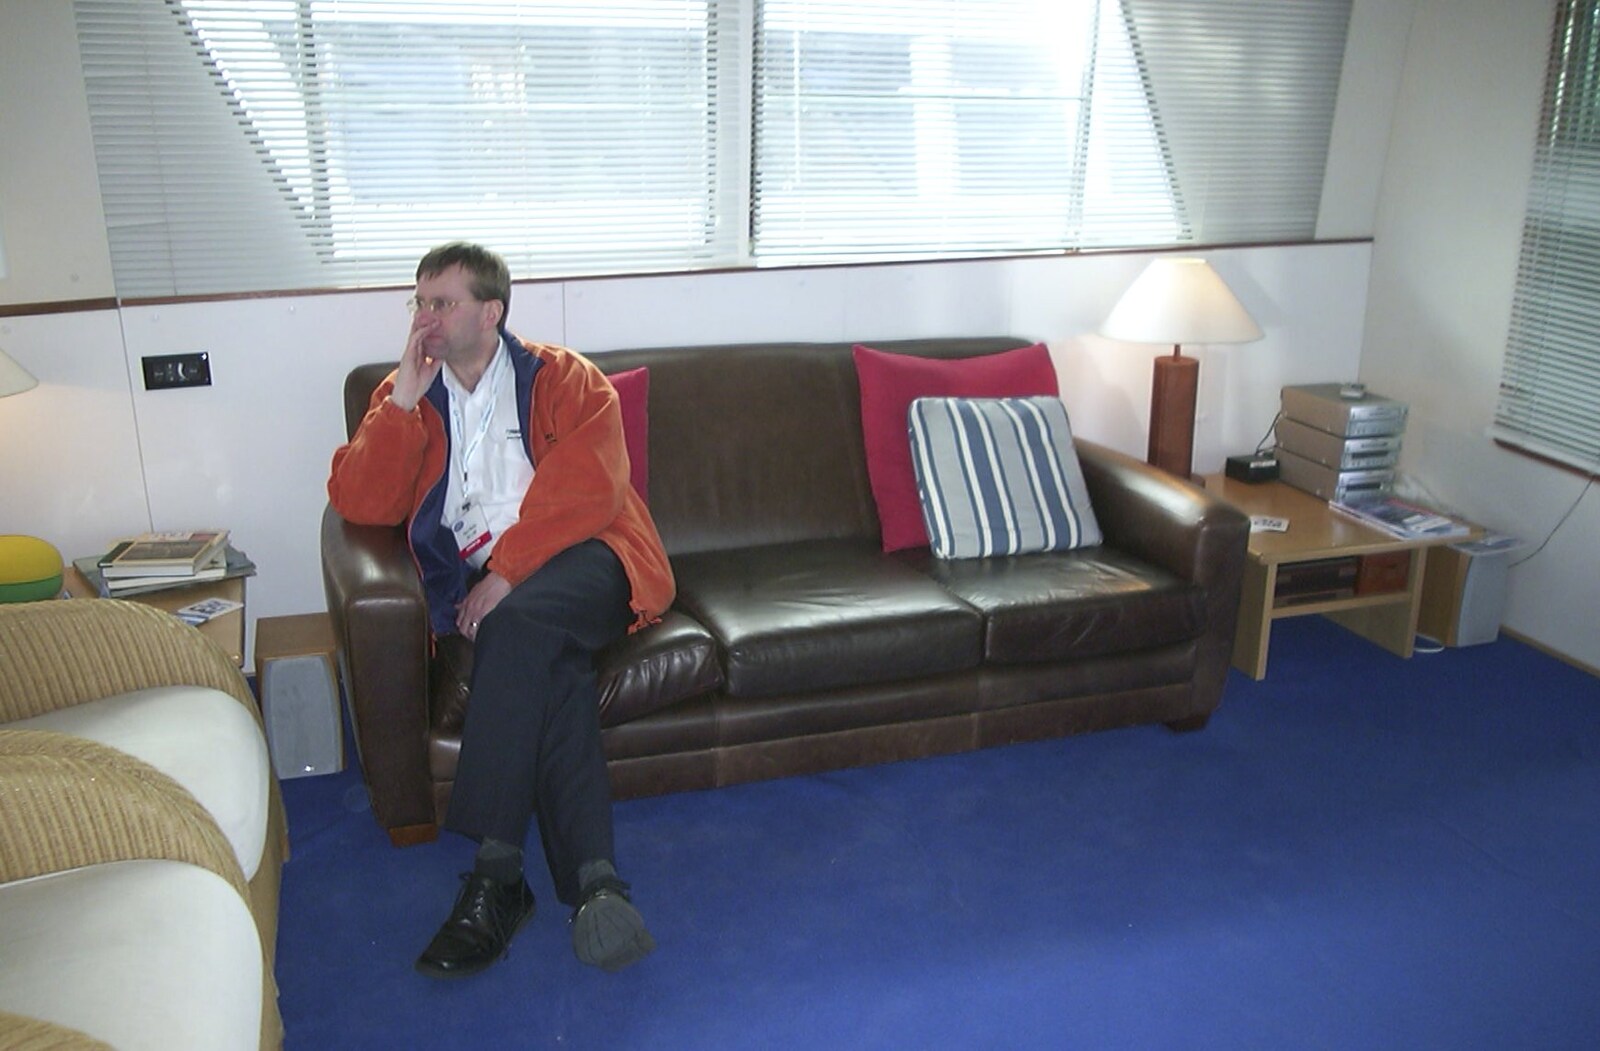 Paul Reilly waits for stuff to happen from 3G Lab at the 3GSM Conference, Cannes, France - 17th February 2003